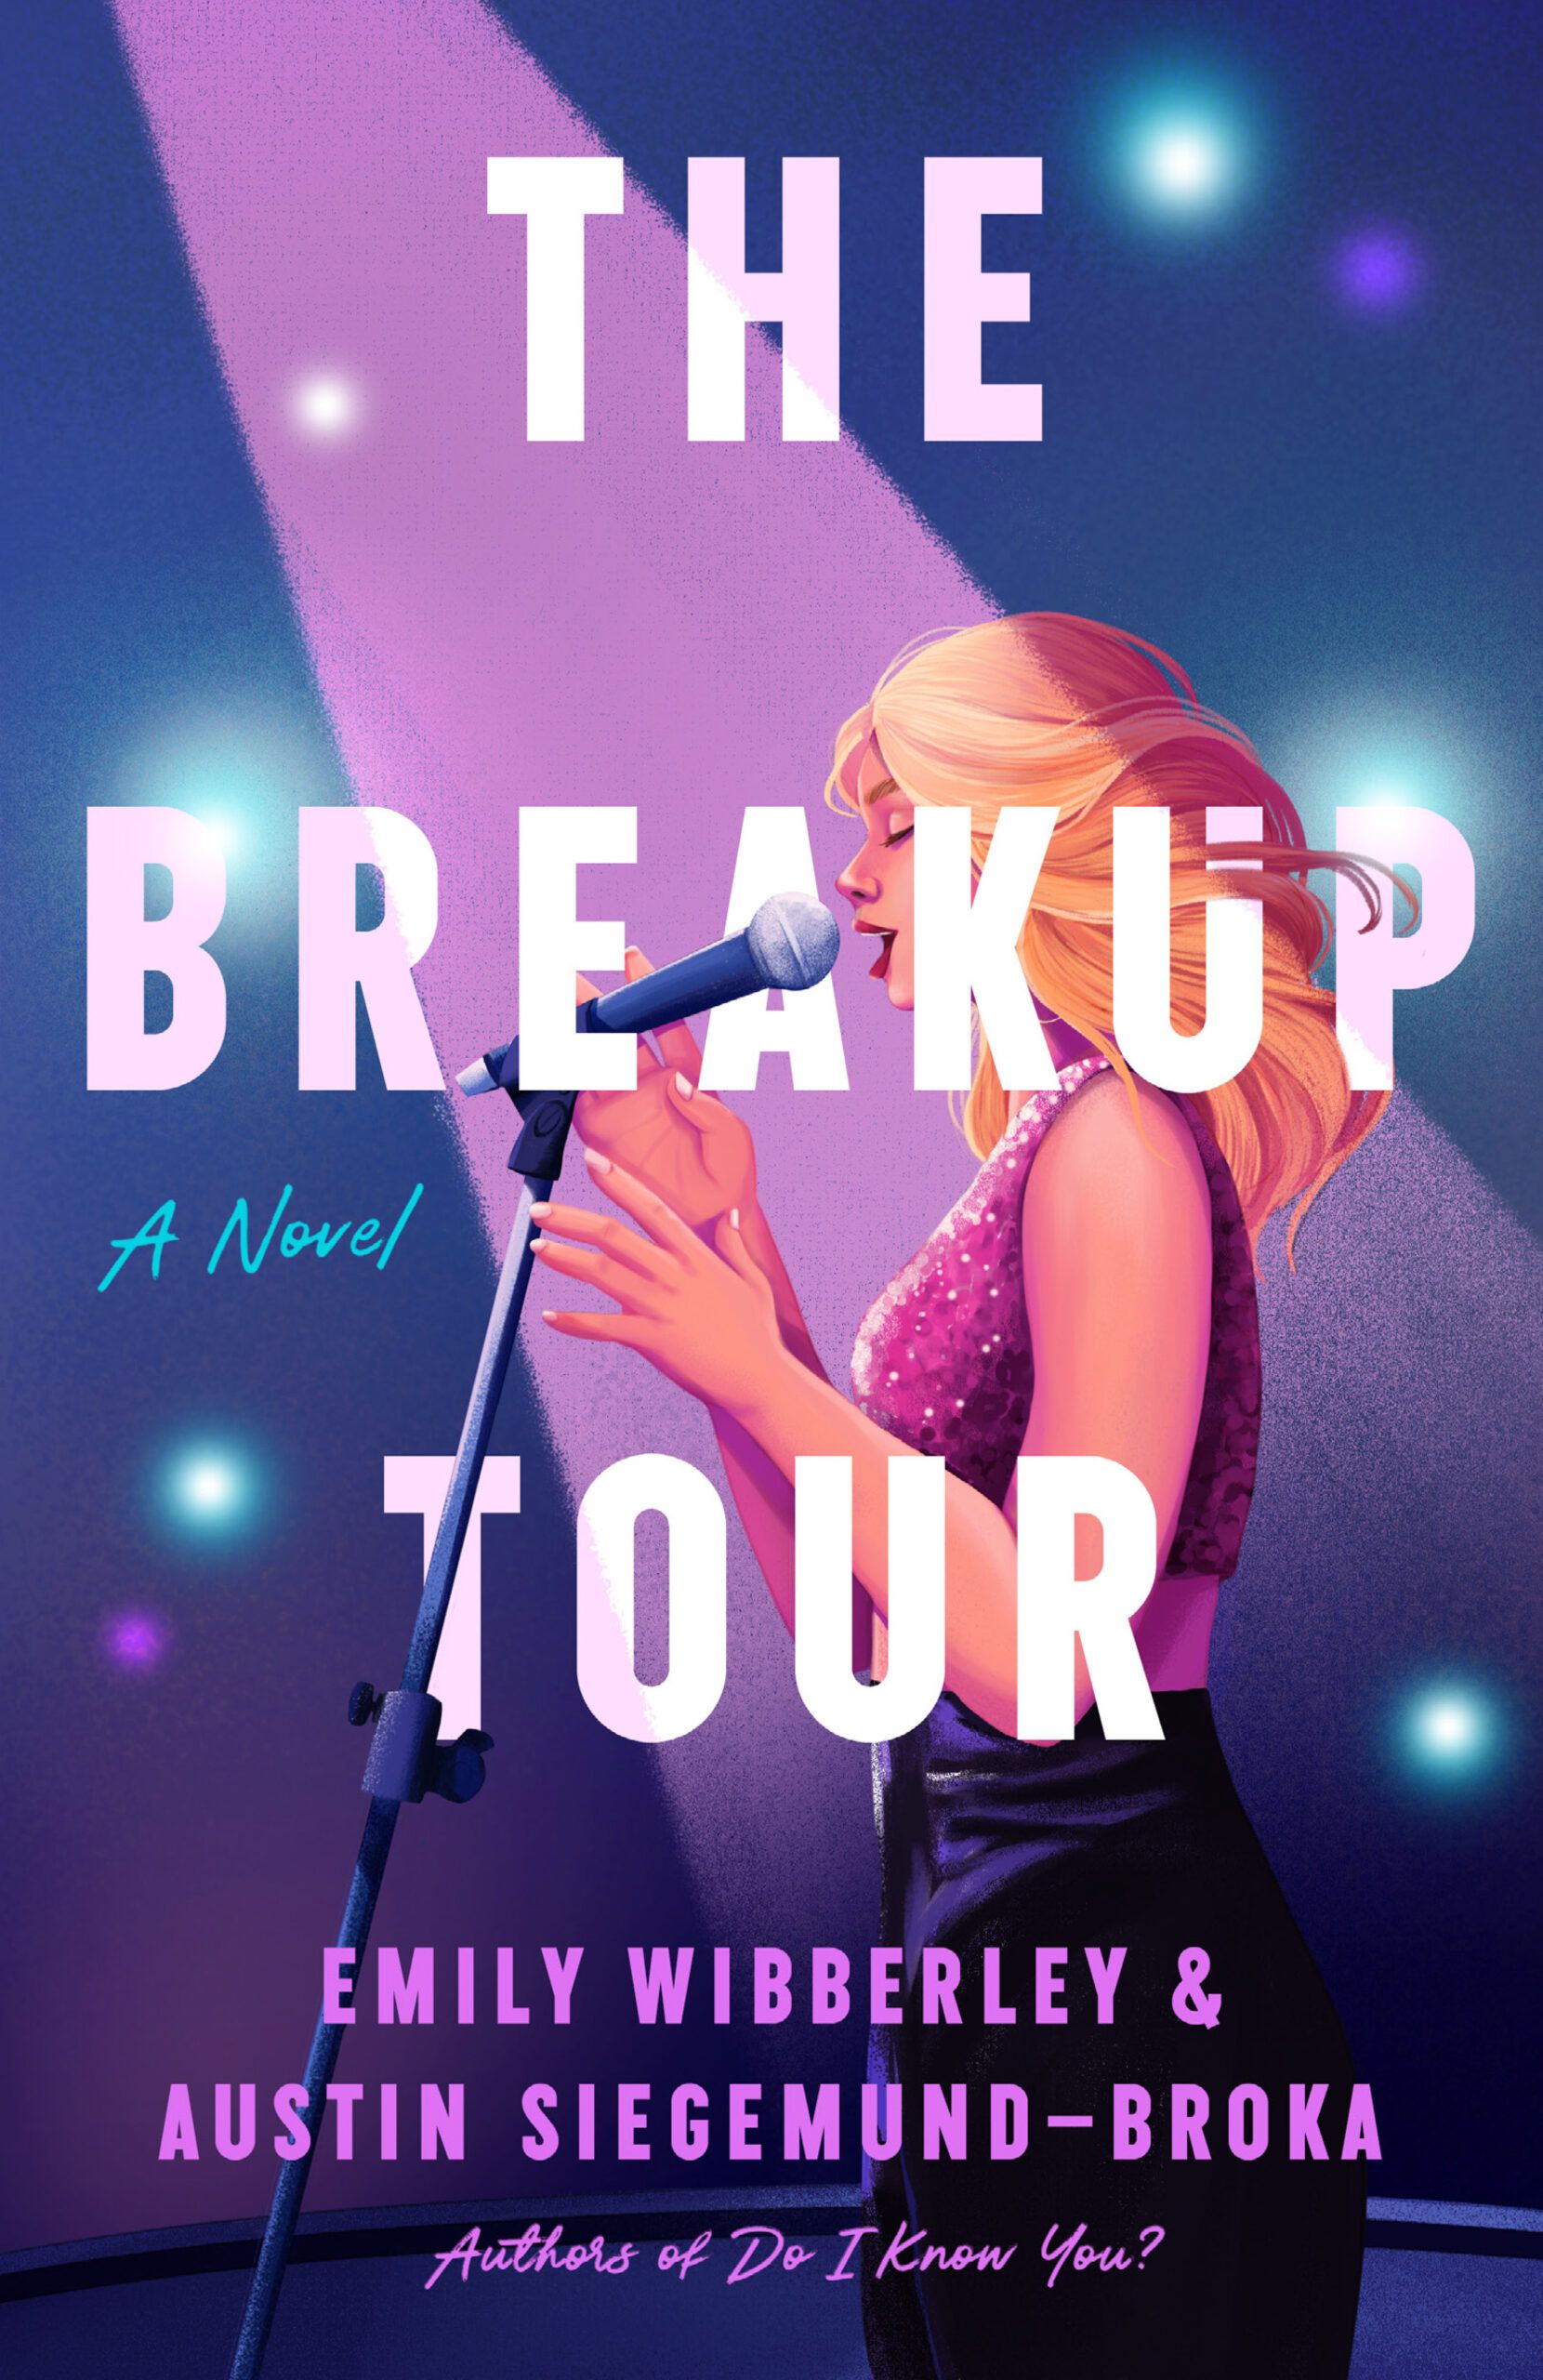 the breakup tour book cover